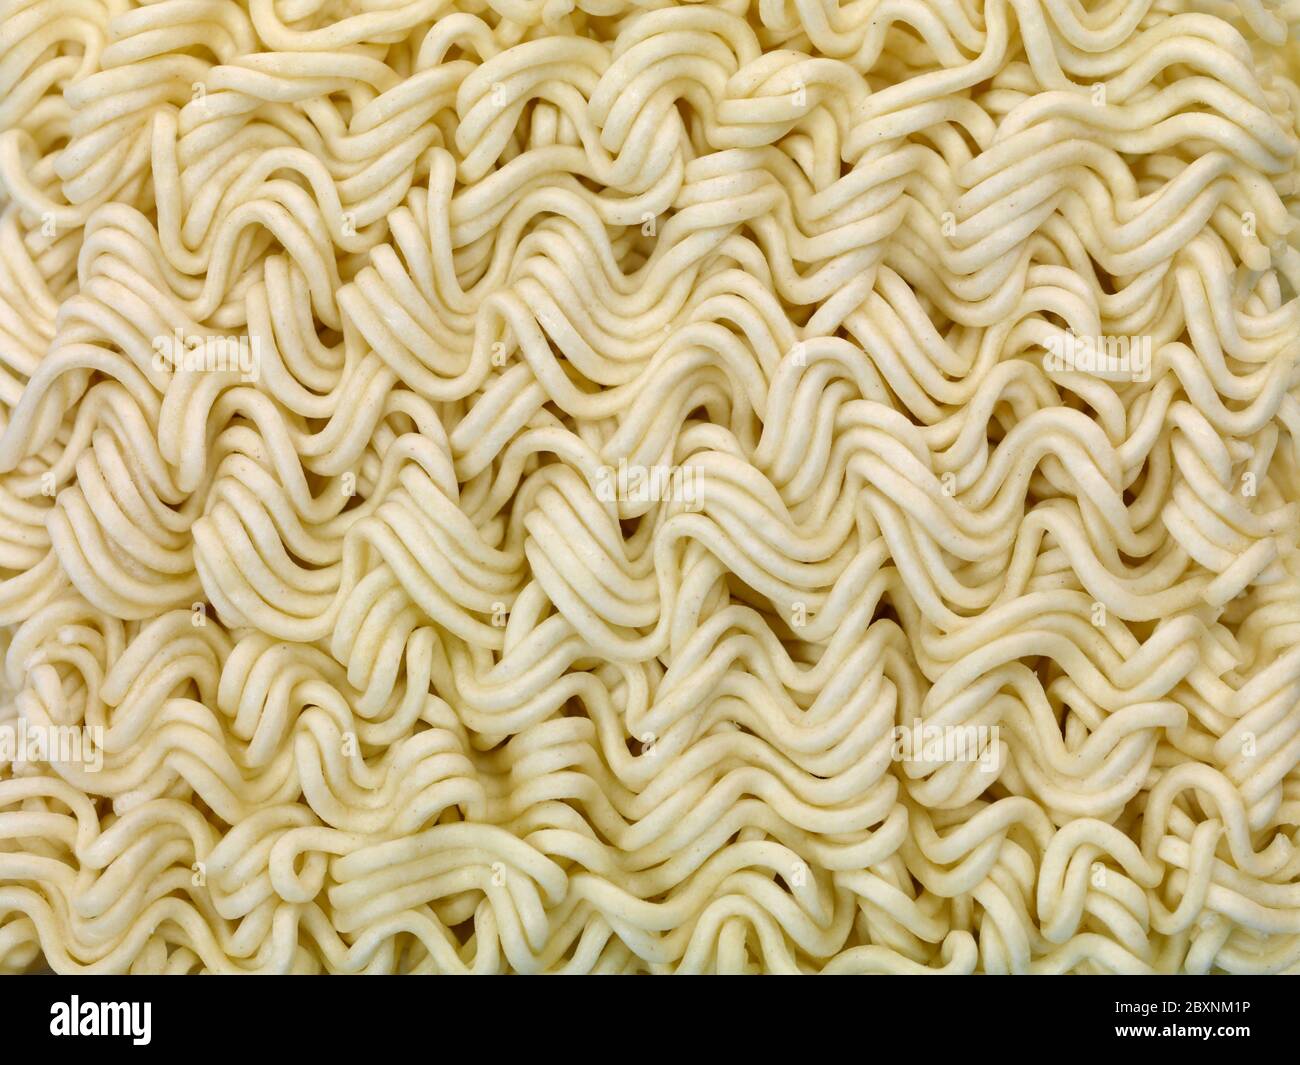 Dry instant noodles up close Stock Photo